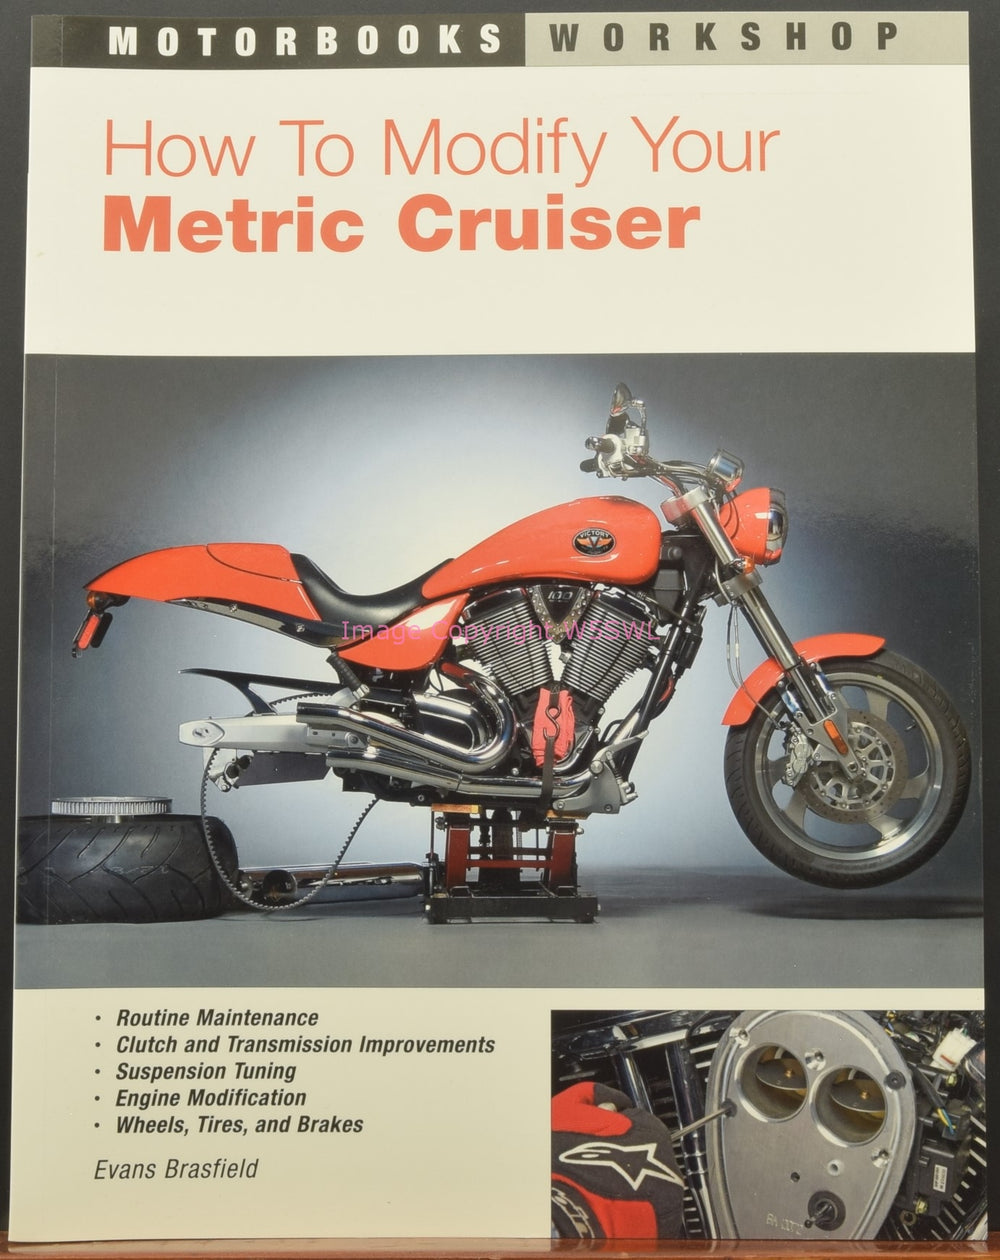 How To Modify Your Metric Cruiser - Dave's Hobby Shop by W5SWL